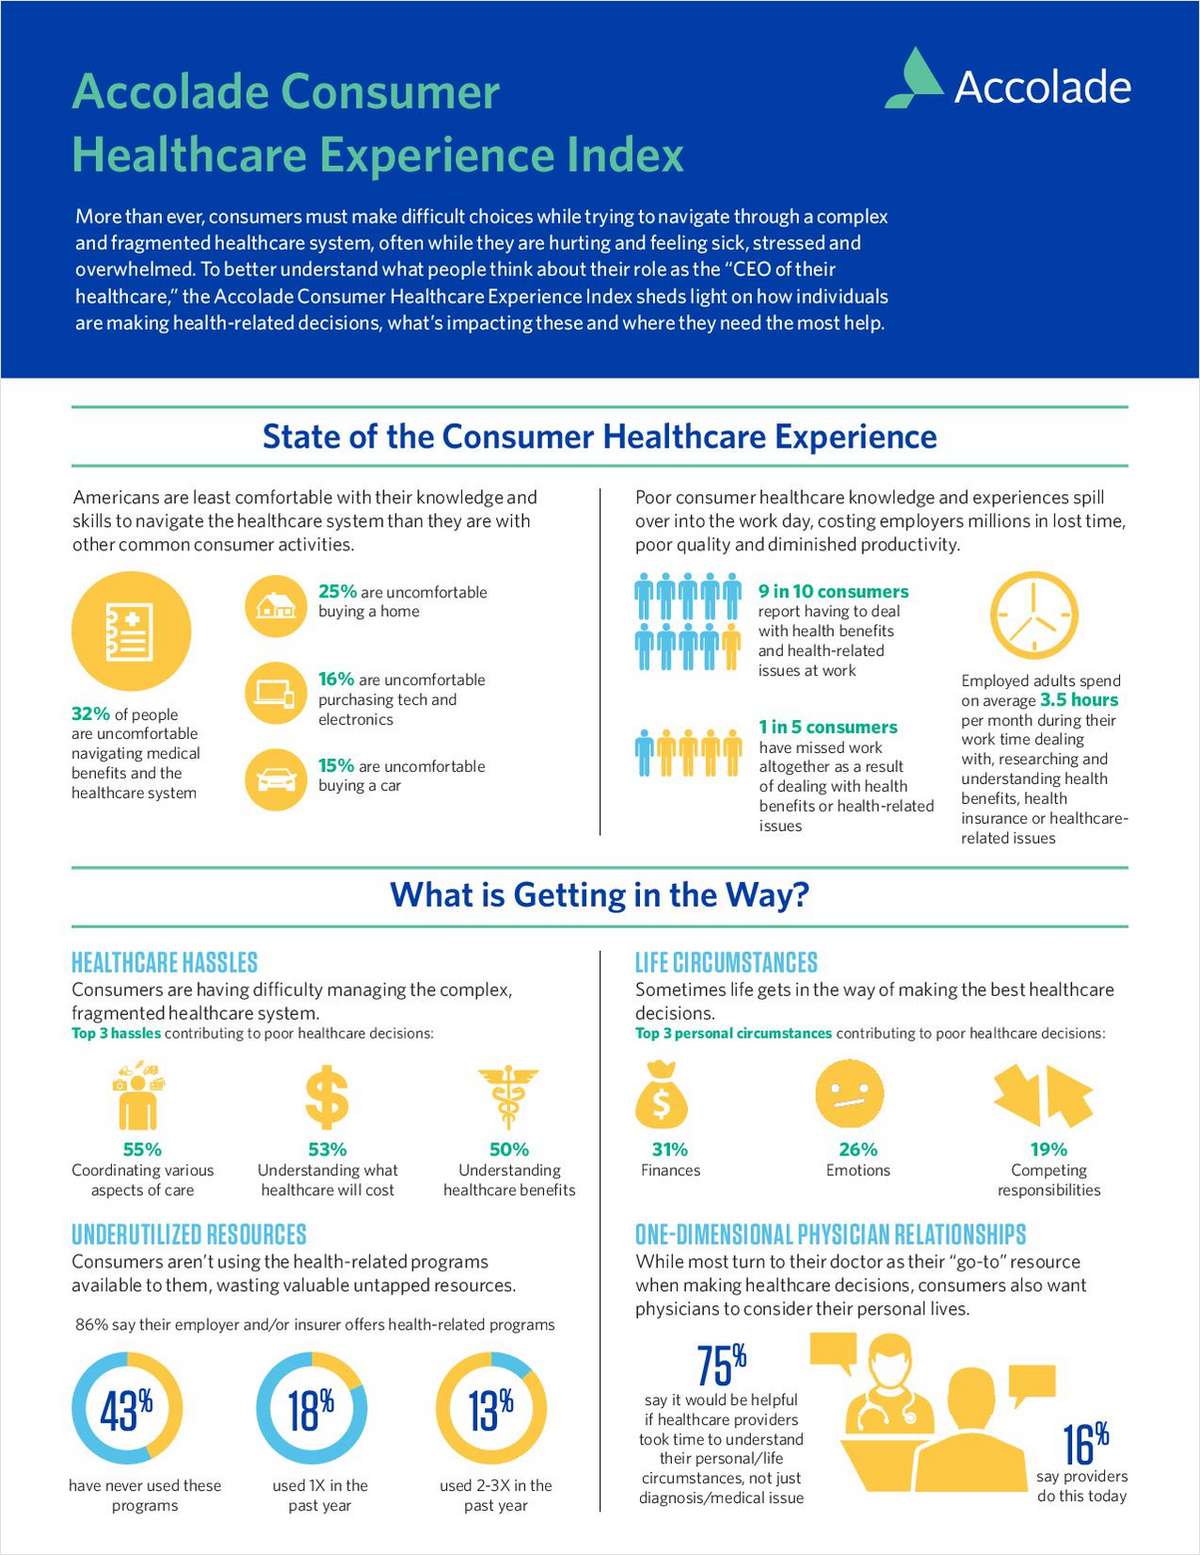 How to Stop Confusion from Fueling Healthcare Costs